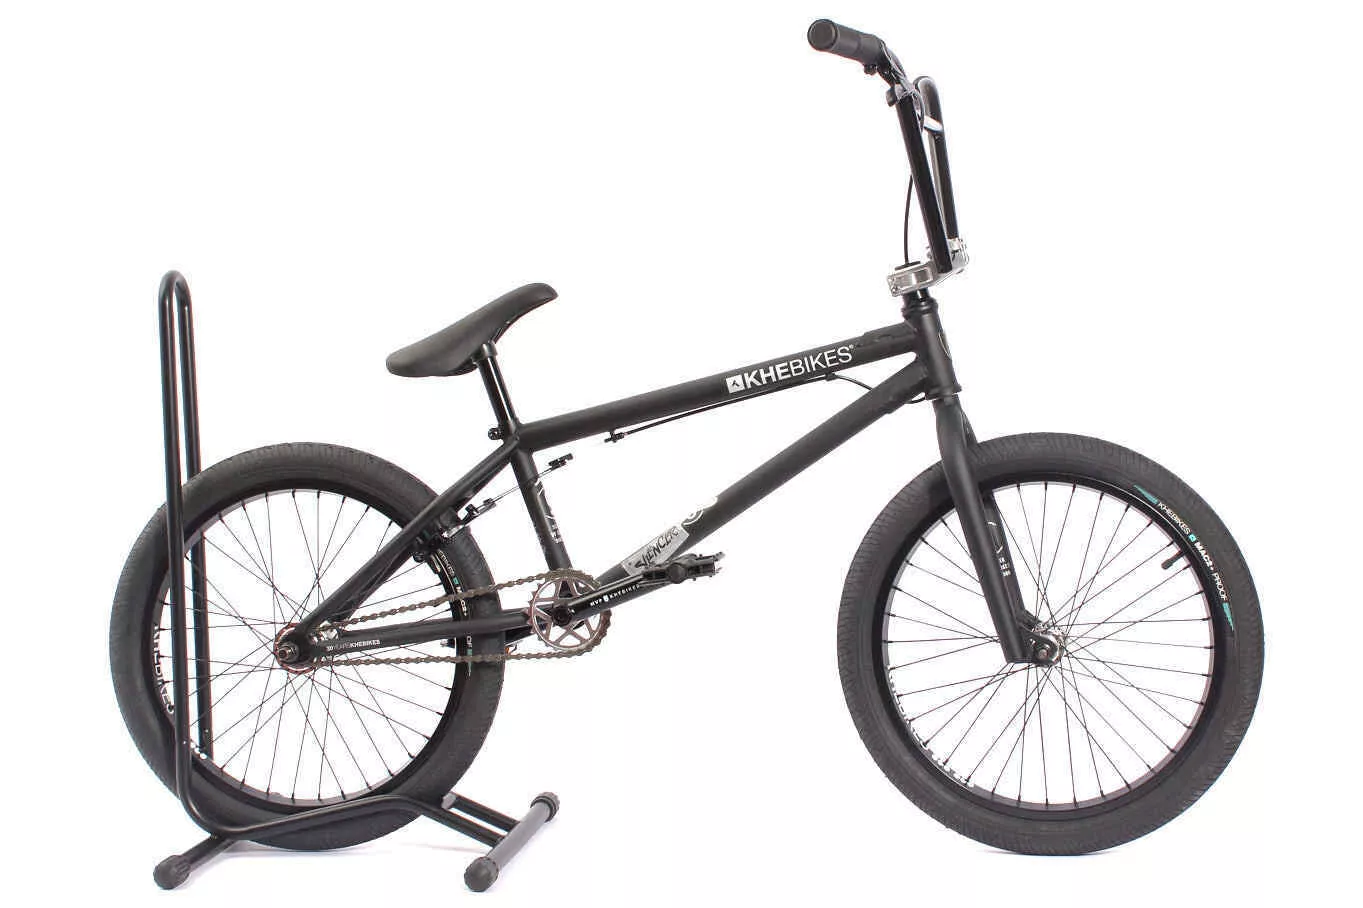 BMX bicycle stand KHE 16 to 28 inch